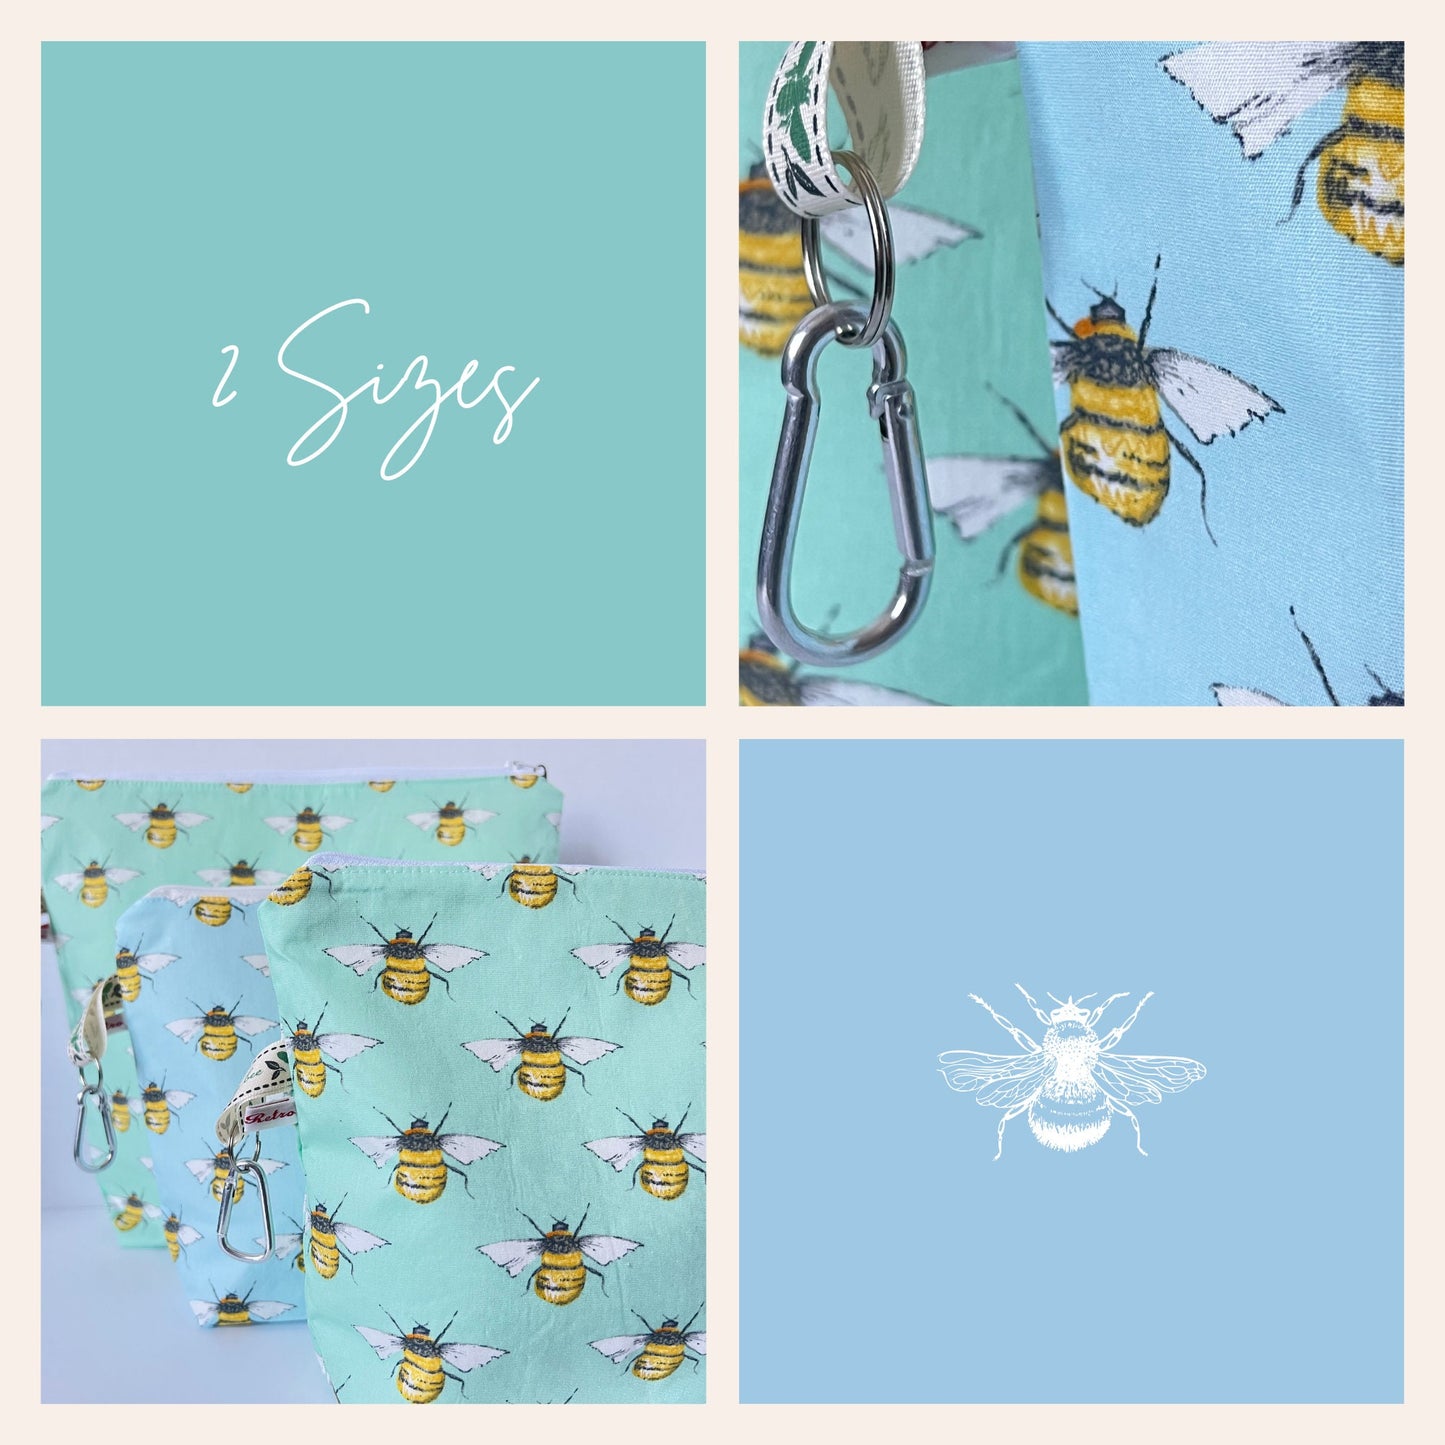 Bumblebee Print Knitting Project Bag - Summer Bee Fabric with Free Stitch Marker Zipper - Busy Bee